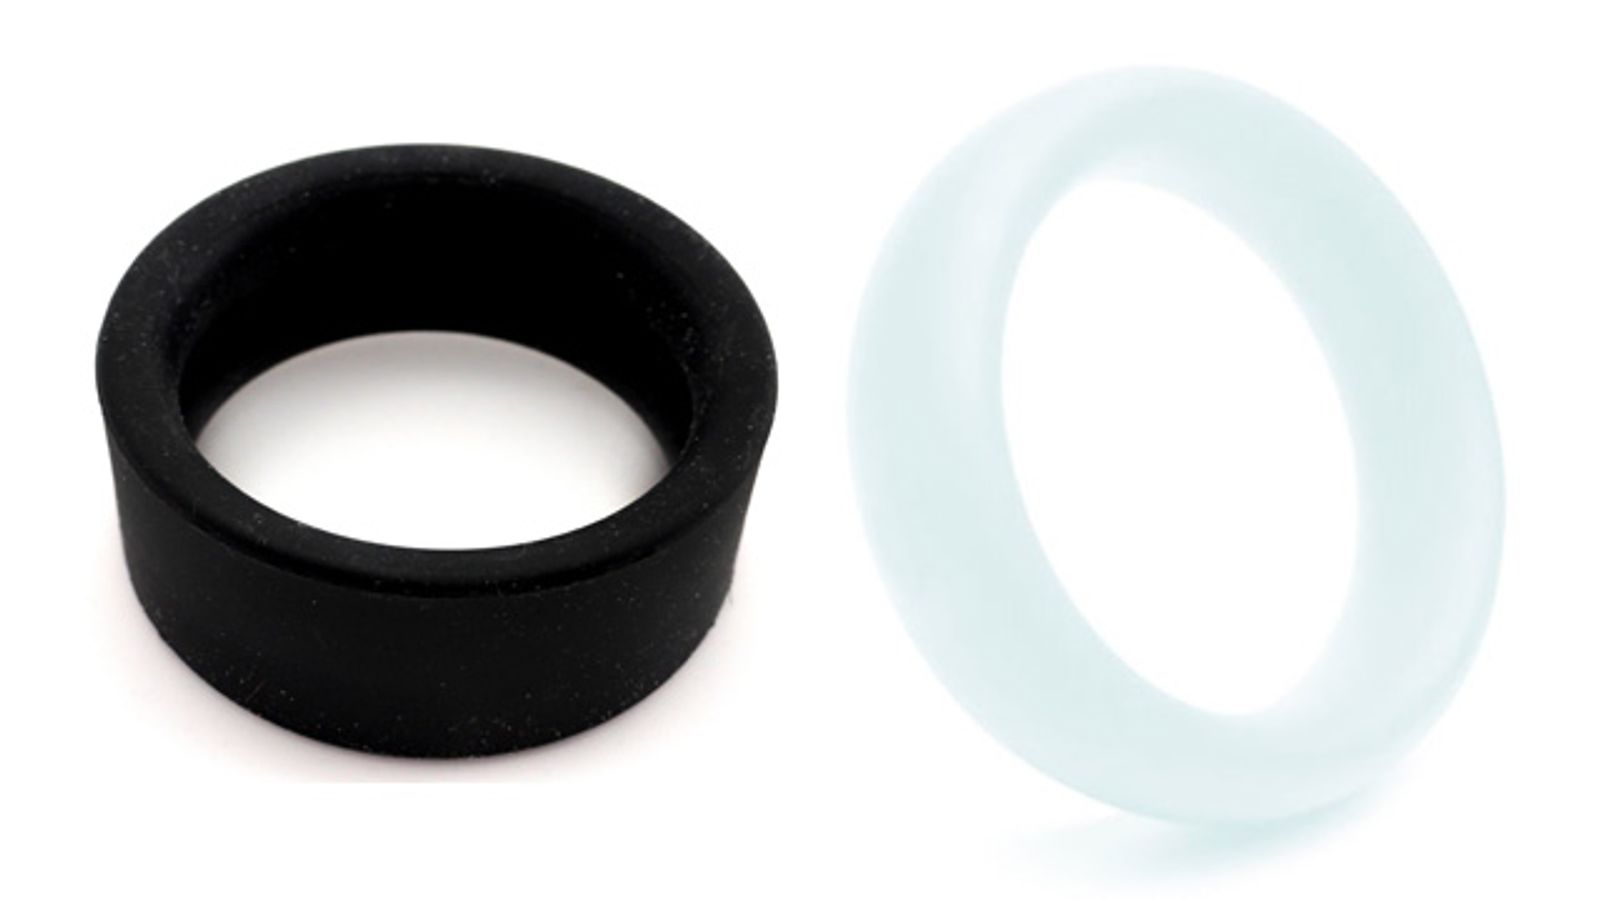 PHS Debuts High-grade Silicone Vibes, Rings to M2M, H2H Sex Toy Lines